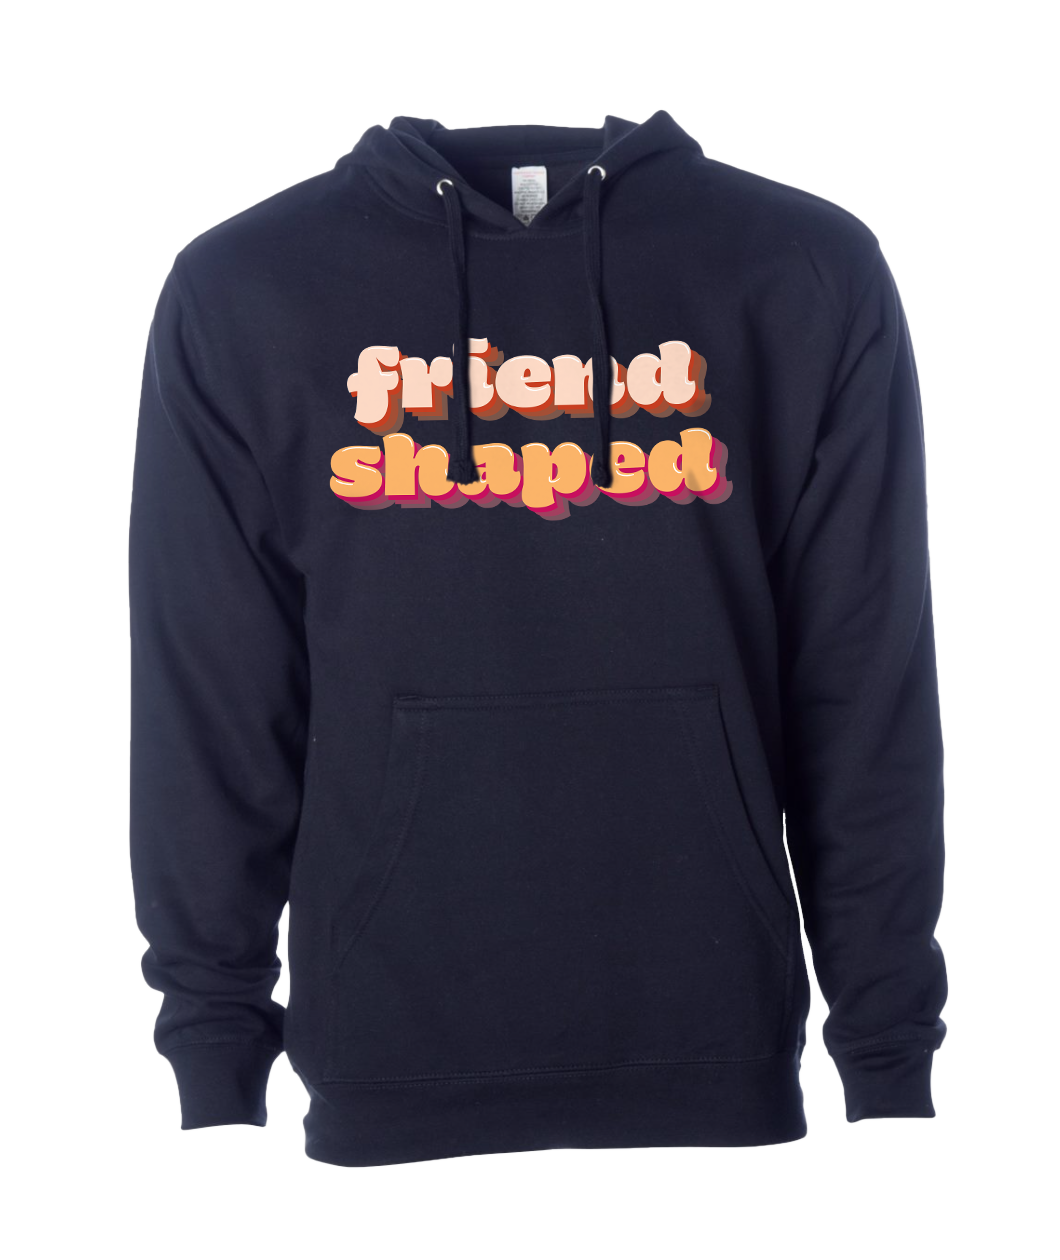 A navy hoodie with the word 